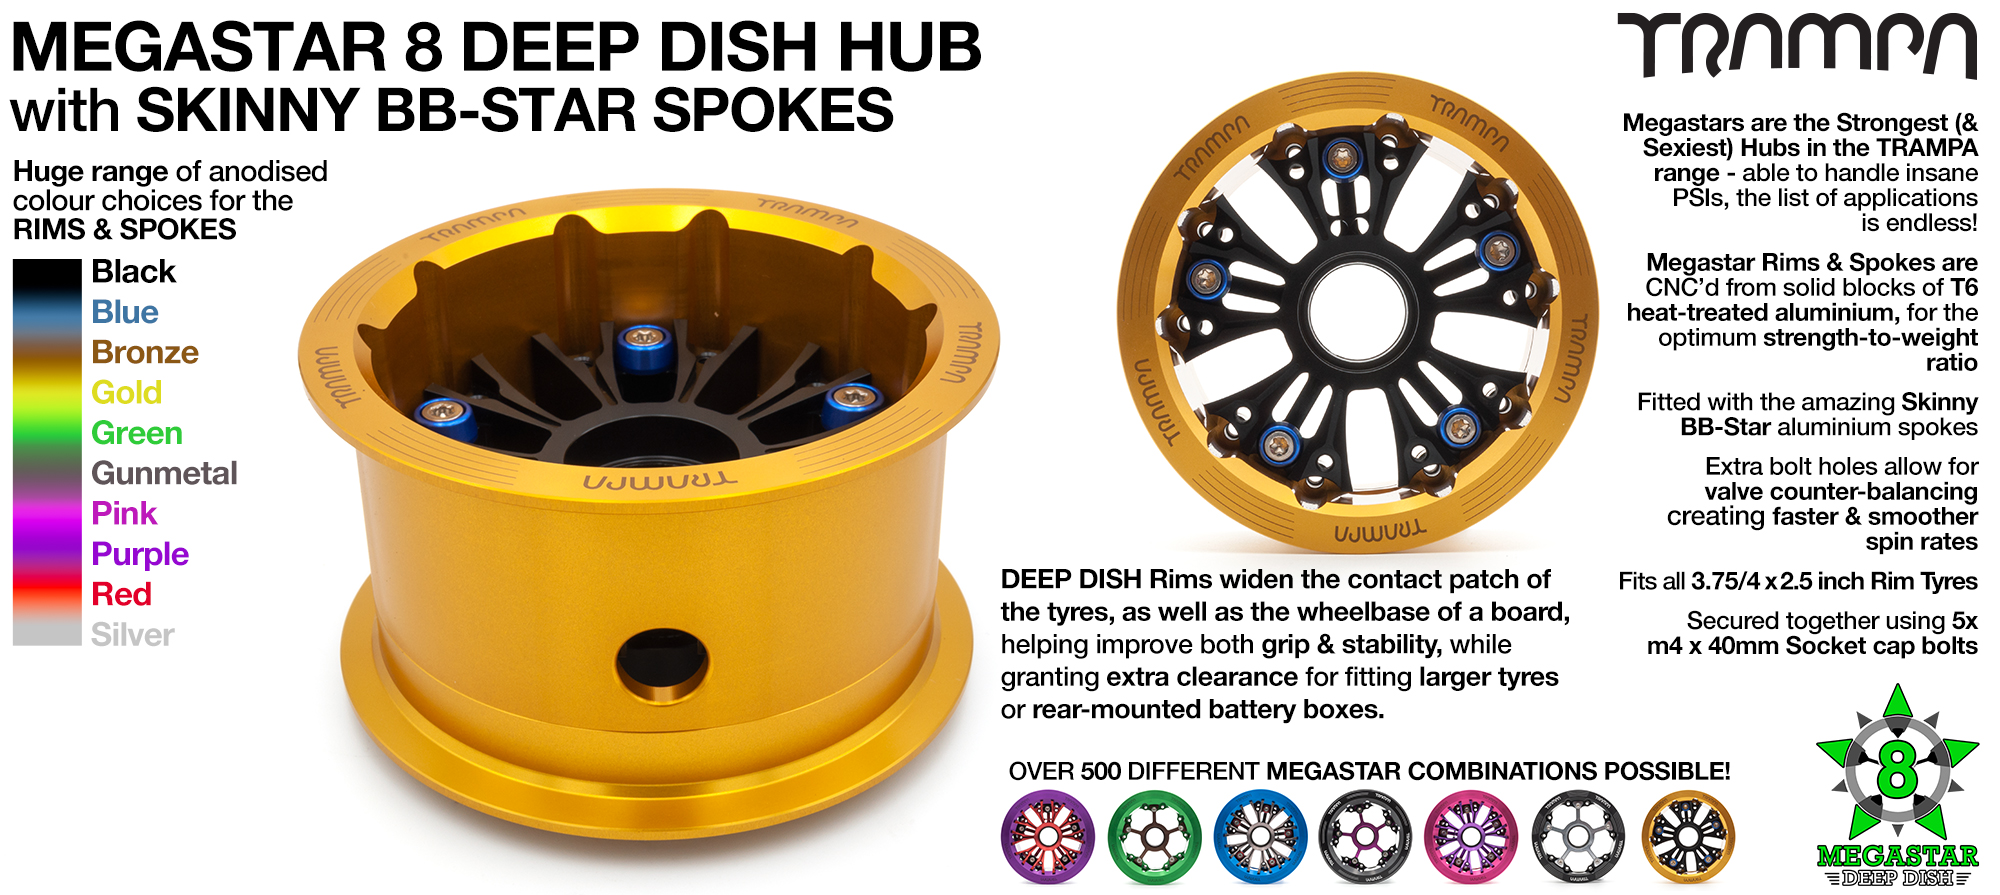 Deep-Dish MEGASTAR 8 with CLASSIC 5 Spokes 3.75 x 2.5 Inch - Fits Pneumatic tyres up to 8 Inches in outer diameter